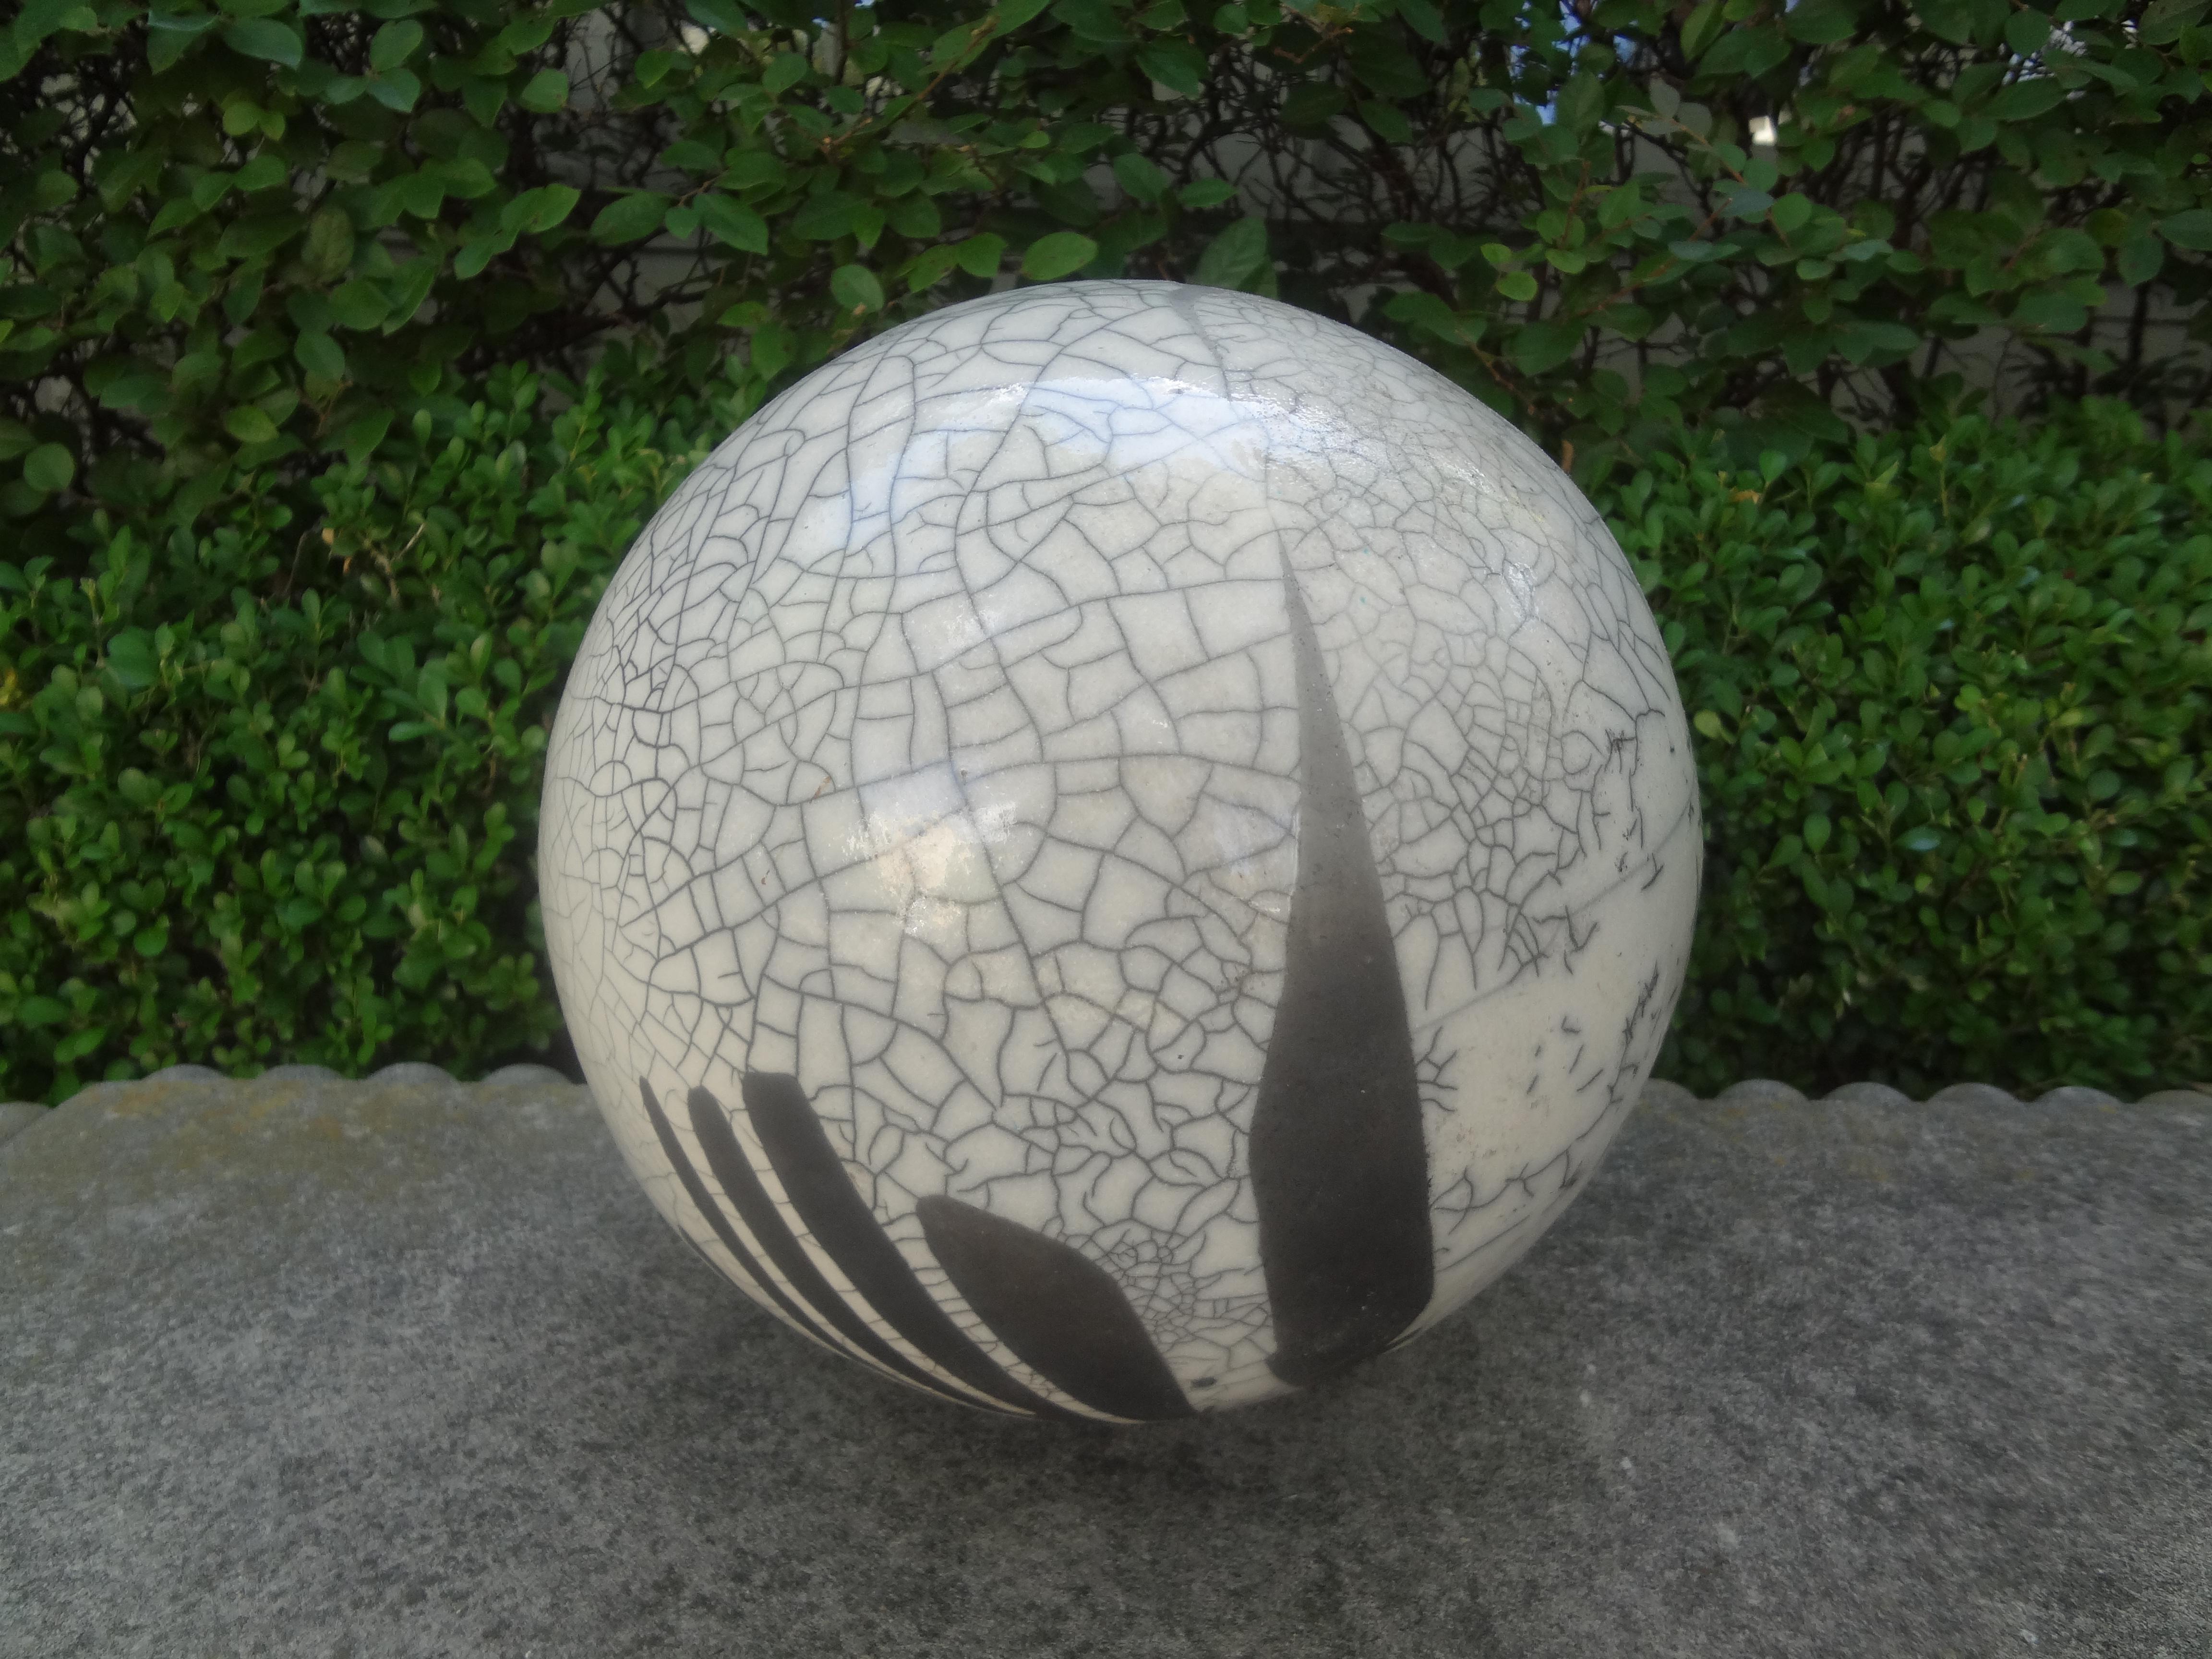 Large black and white abstract sphere sculpture attributed to Yuri Zatarain.
Interesting Mid-Century Modern hand decorated black and white abstract sphere sculpture attributed to Yuri Zatarain. This stunning vintage ceramic sphere sculpture is